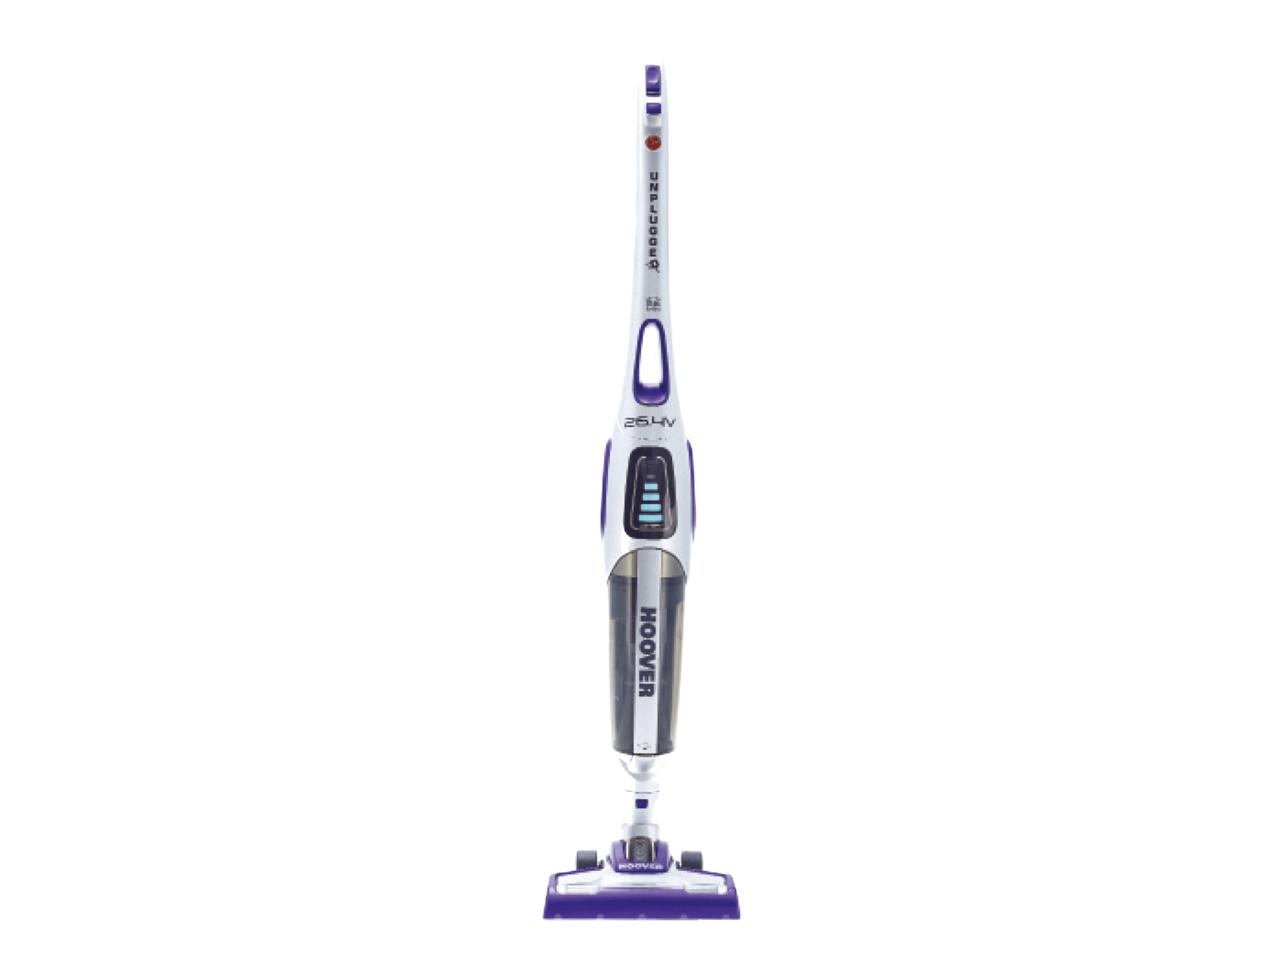 HOOVER Unplugged 26.4V Cordless Stick Vacuum Cleaner